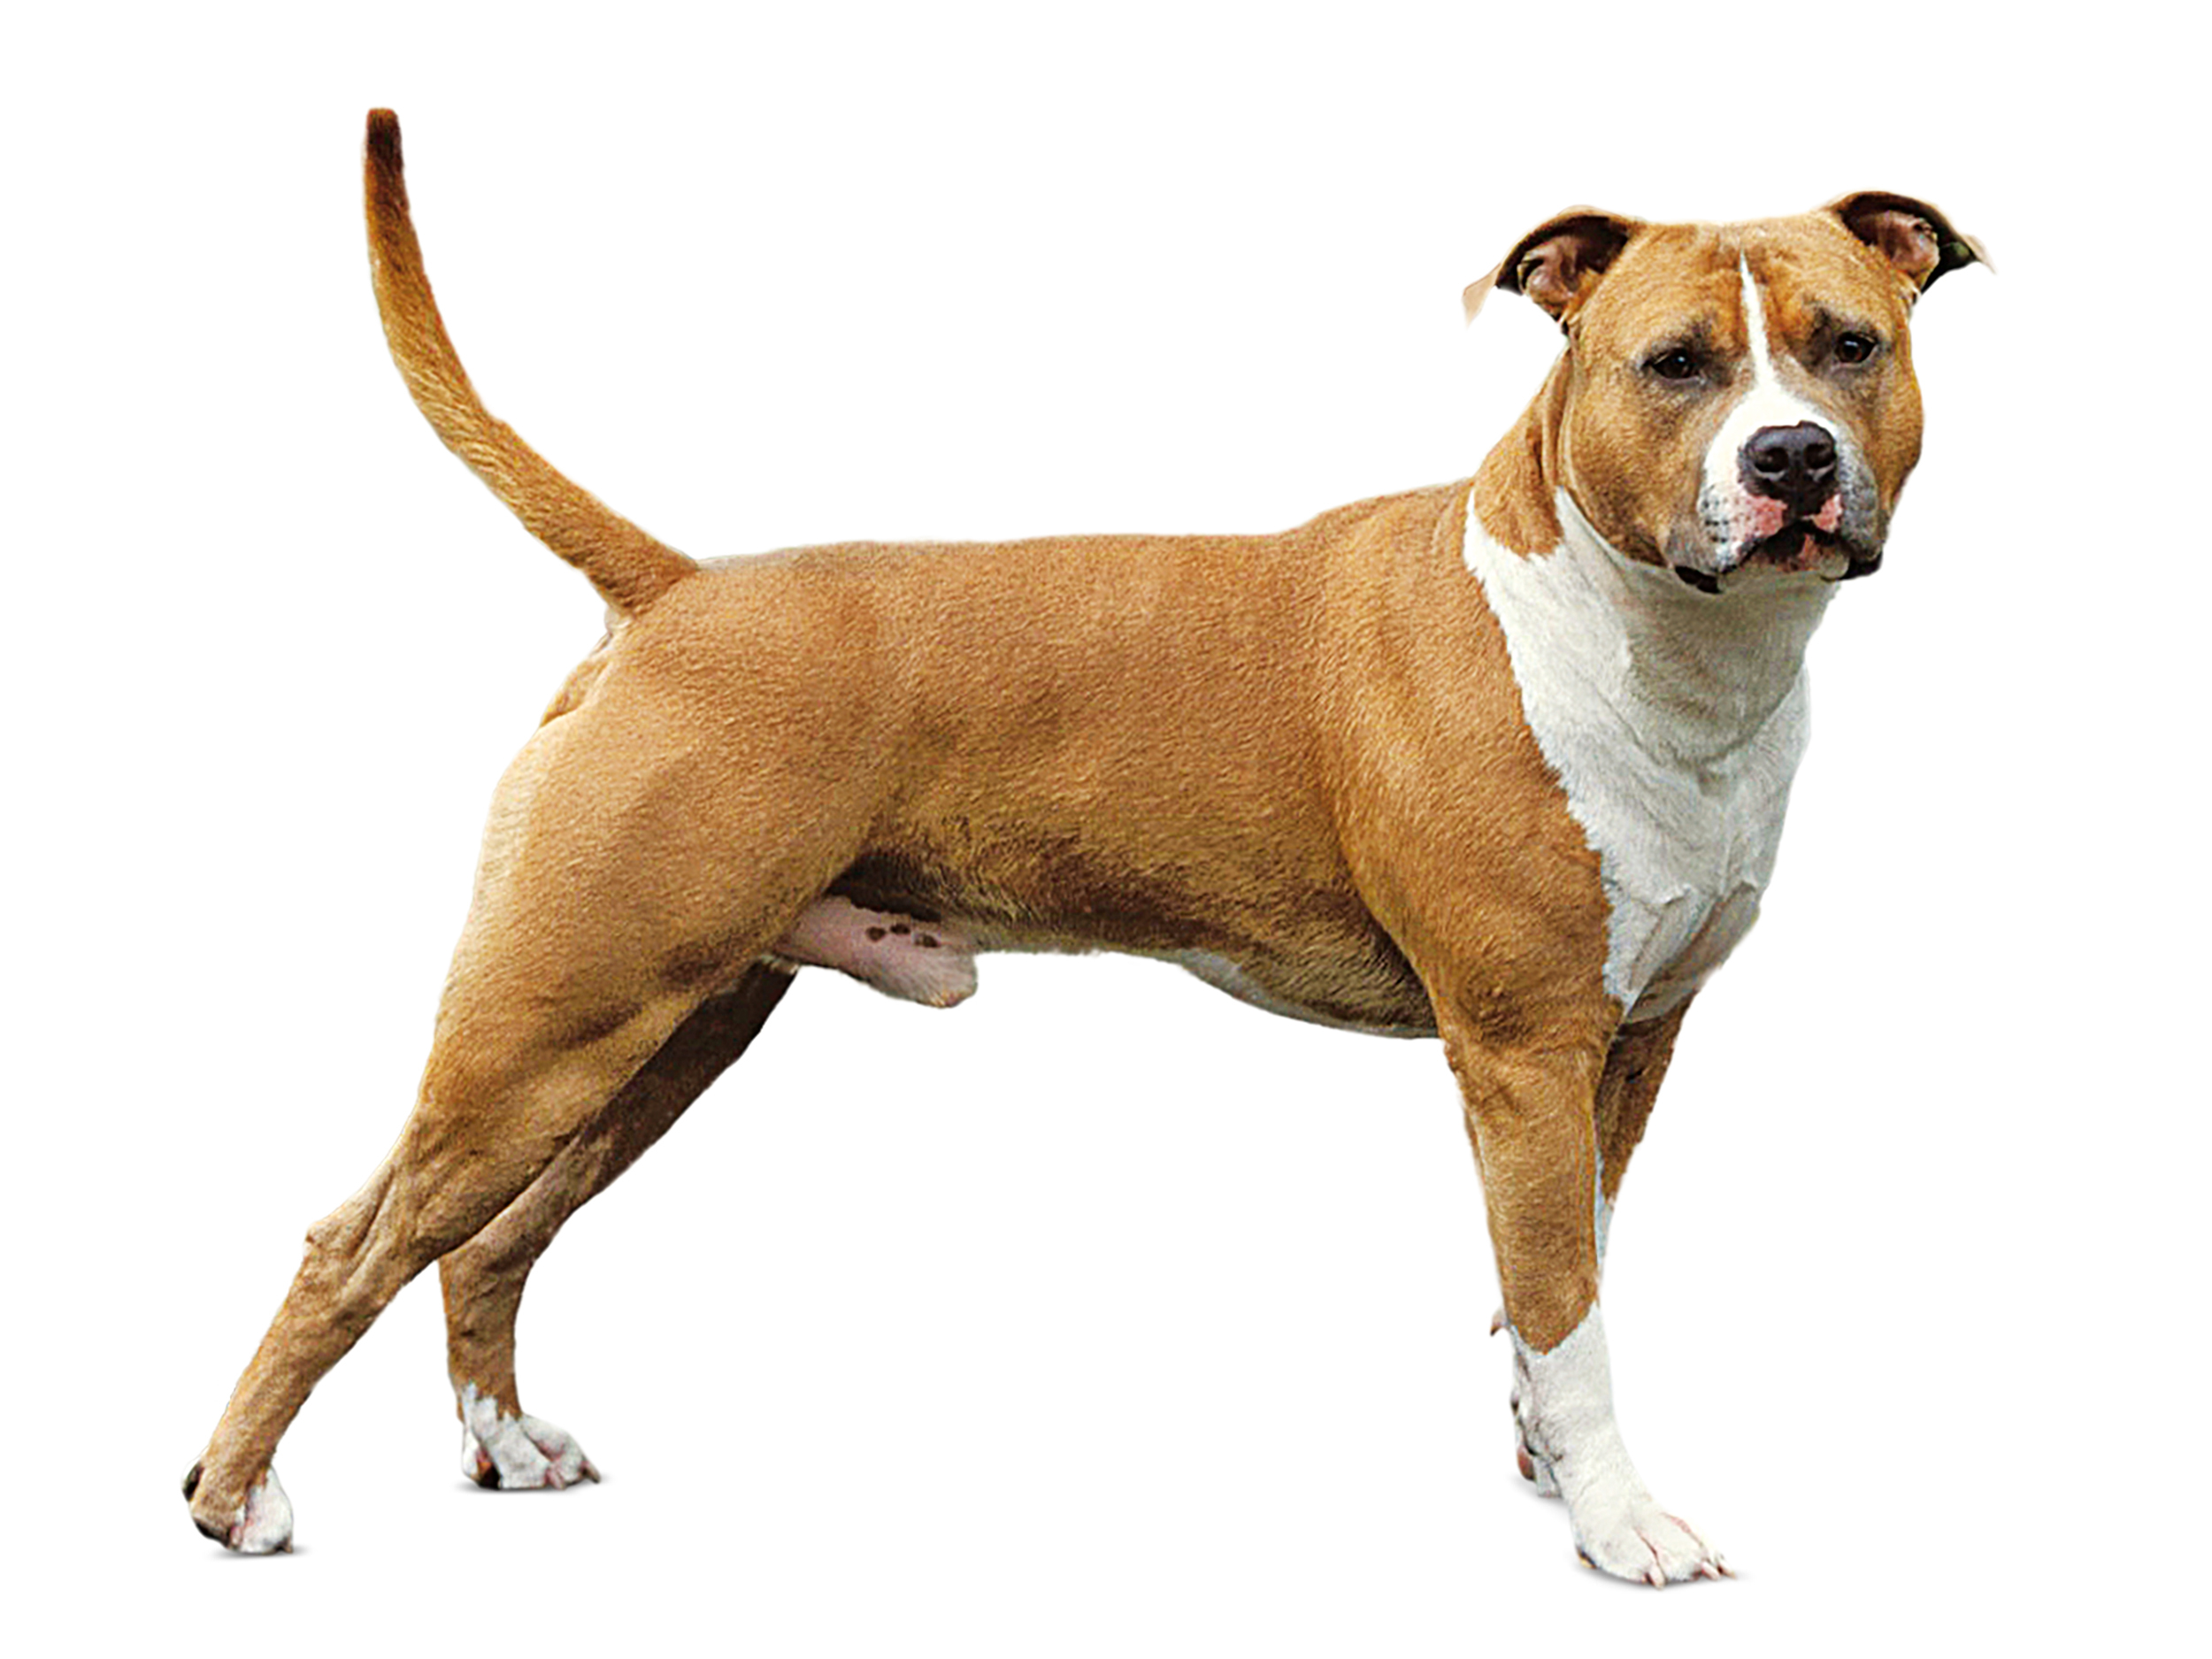 royal canin american staffordshire terrier